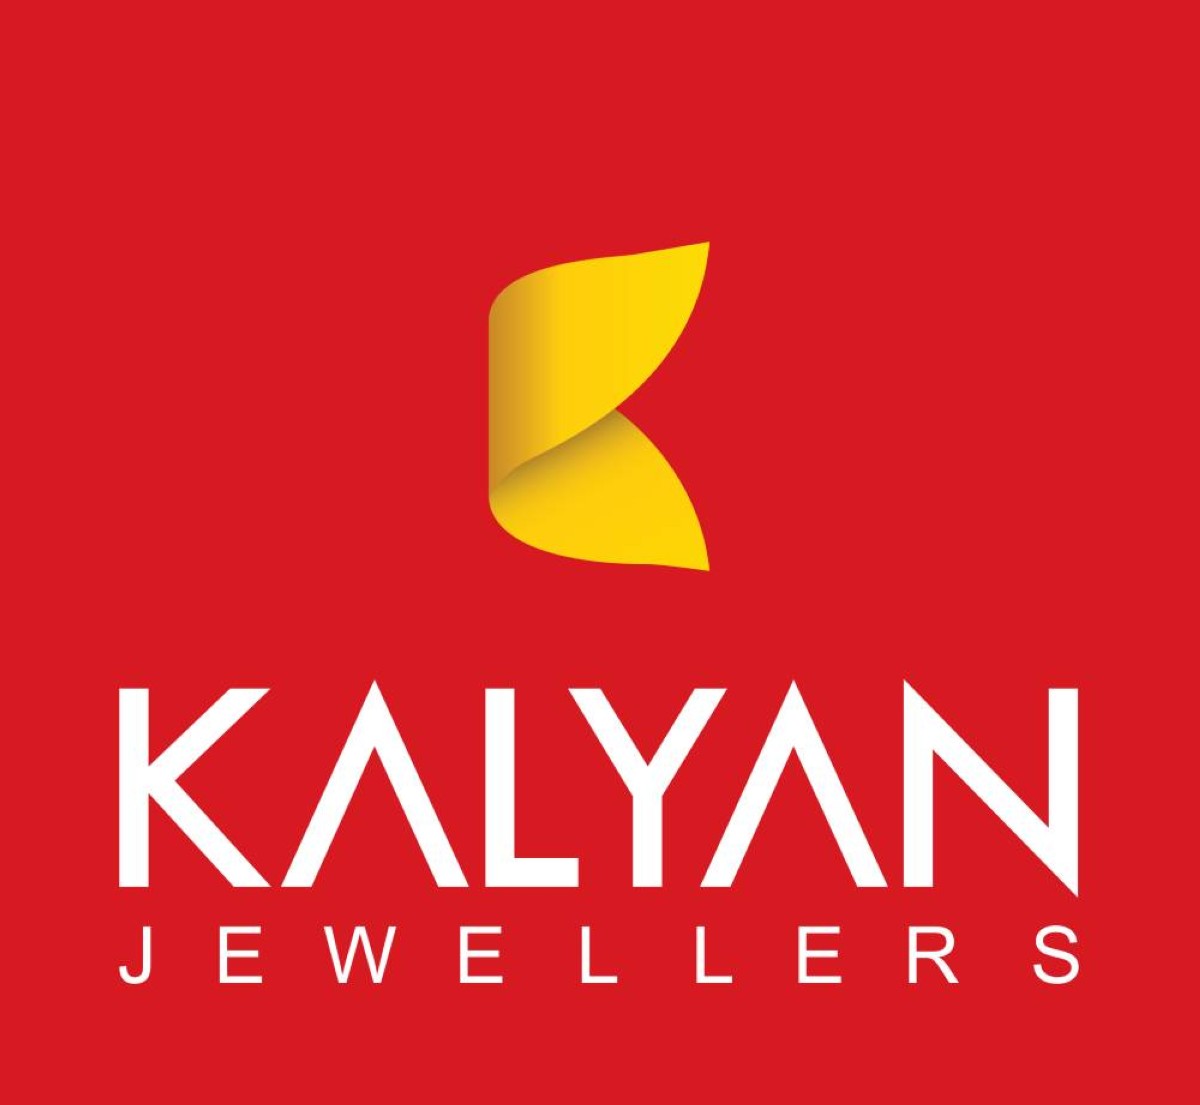 Kalyan Jewellers launches '25 Gold Bars' giveaway campaign | Kuwait Times  Newspaper